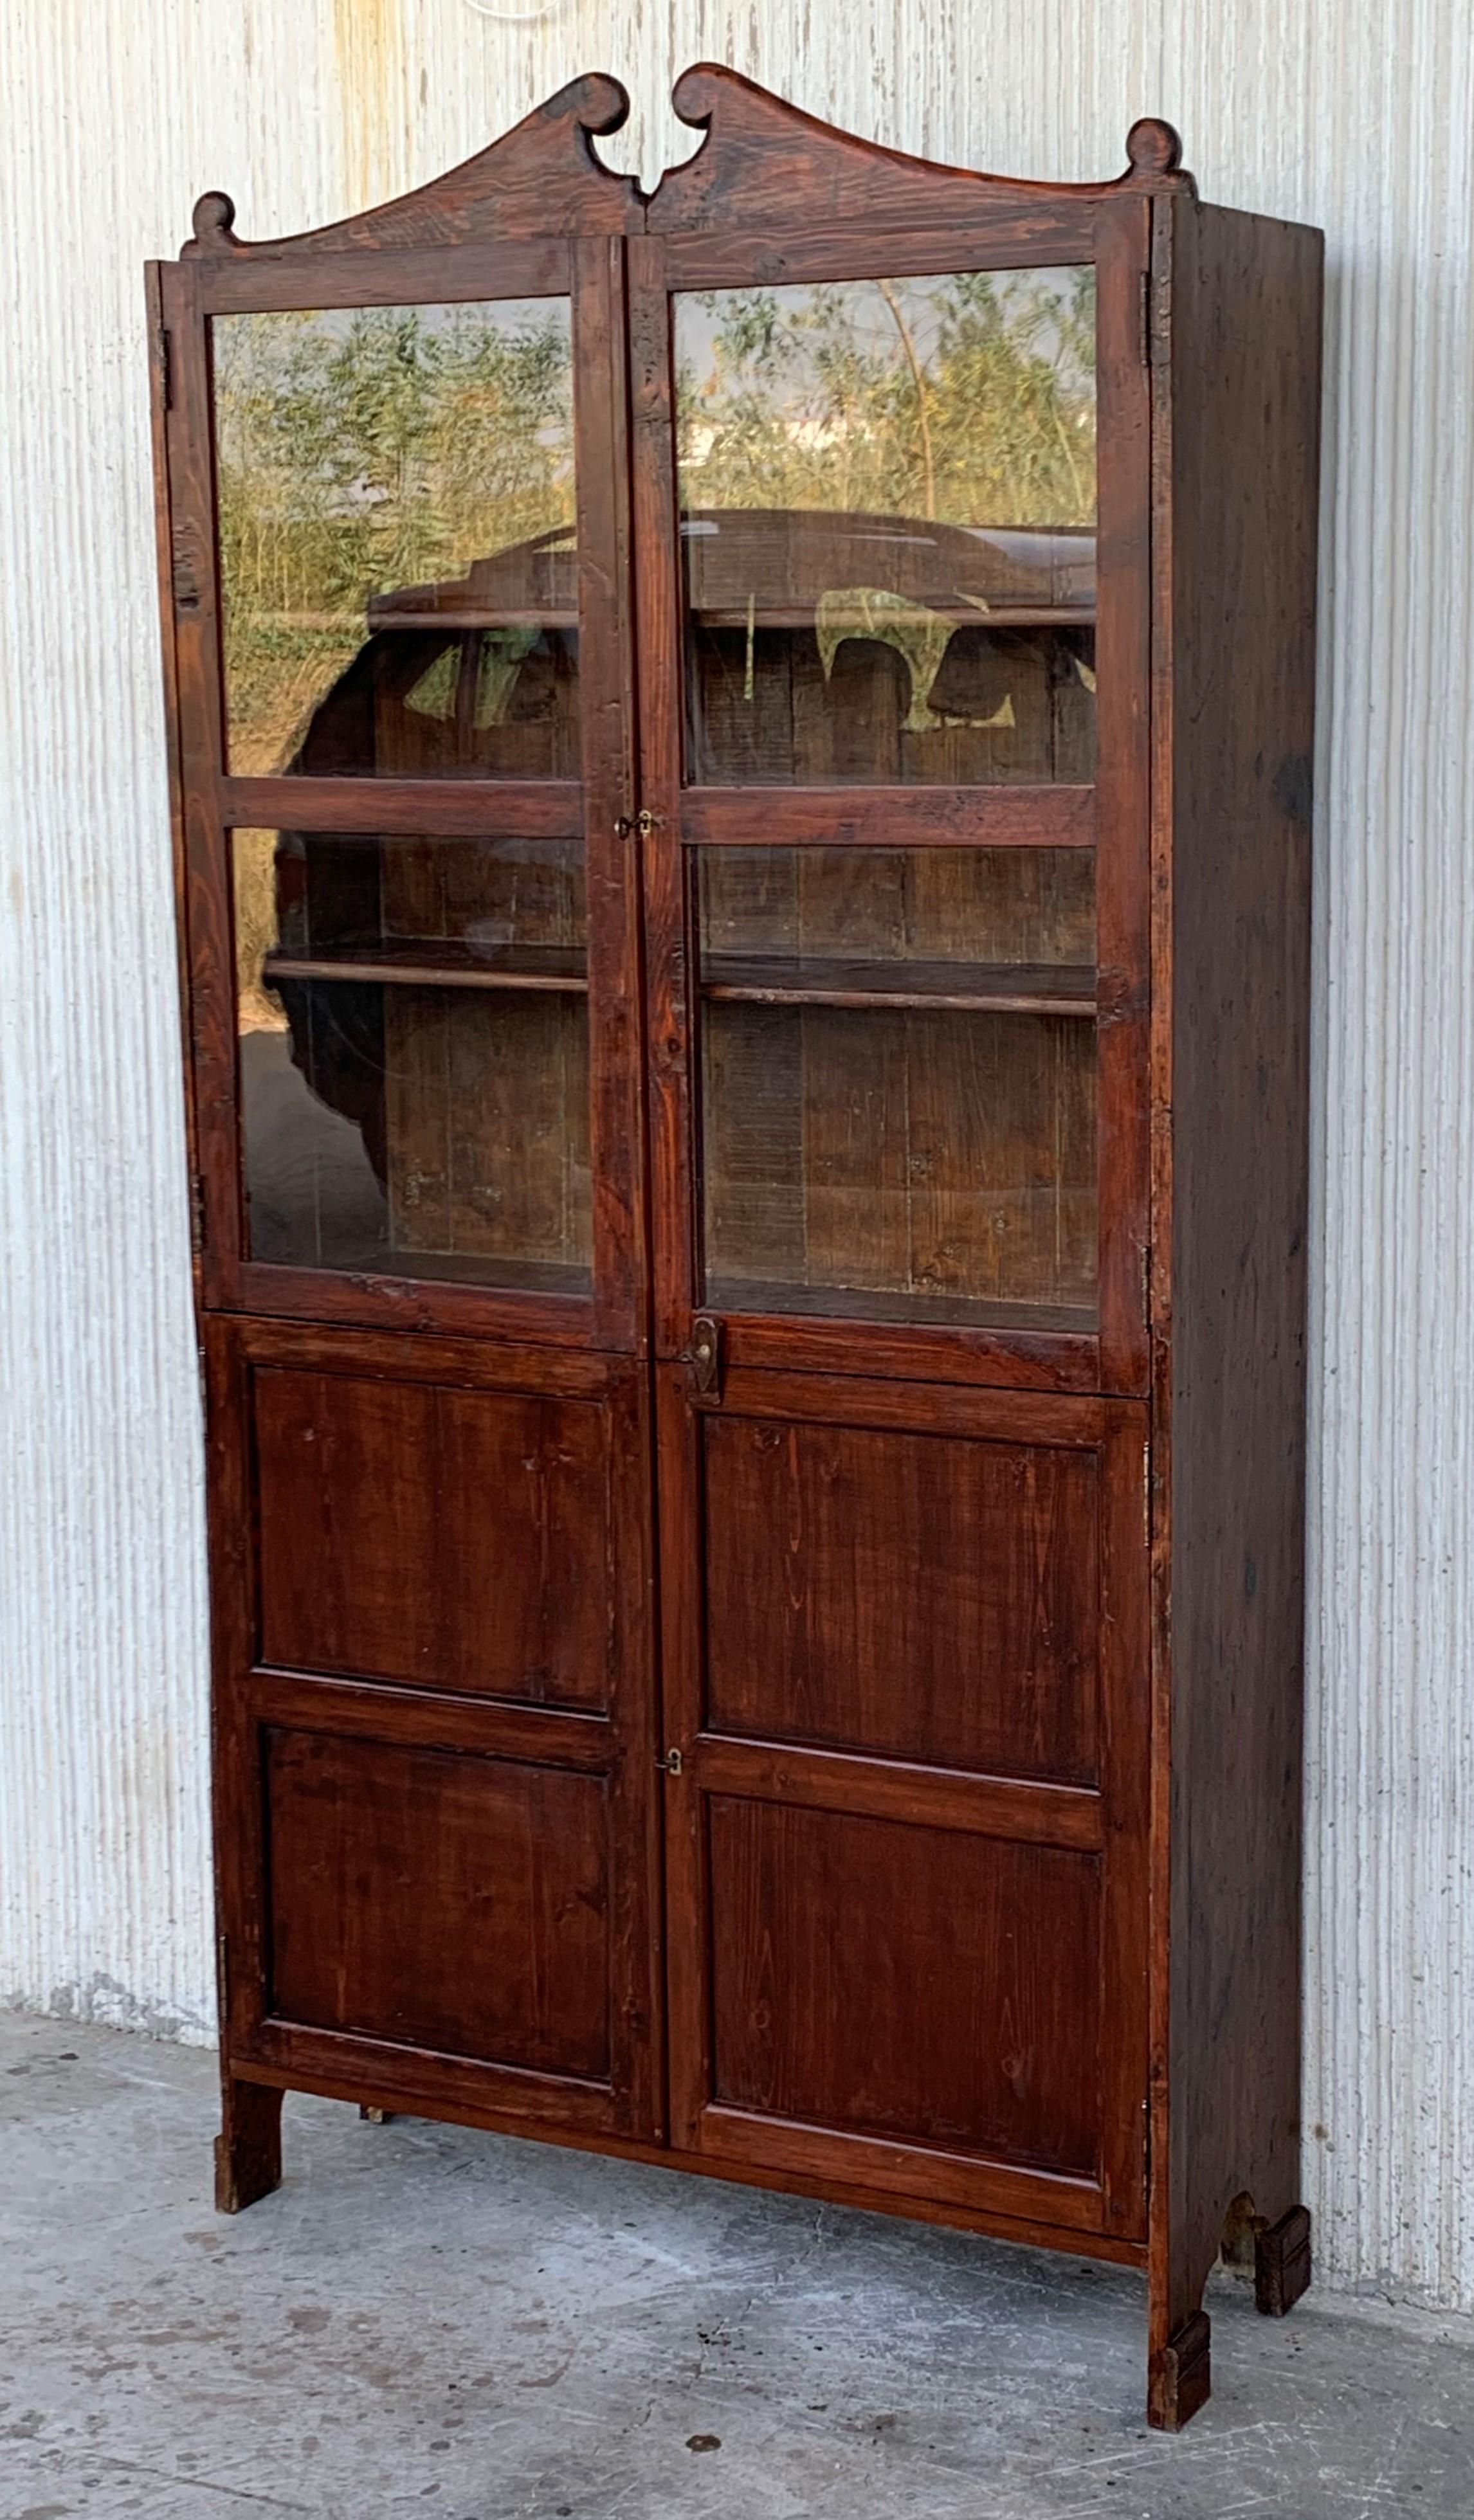 Spanish 18th Century Cupboard or Bookcase with Glass Vitrine, Walnut, Spain Restored For Sale